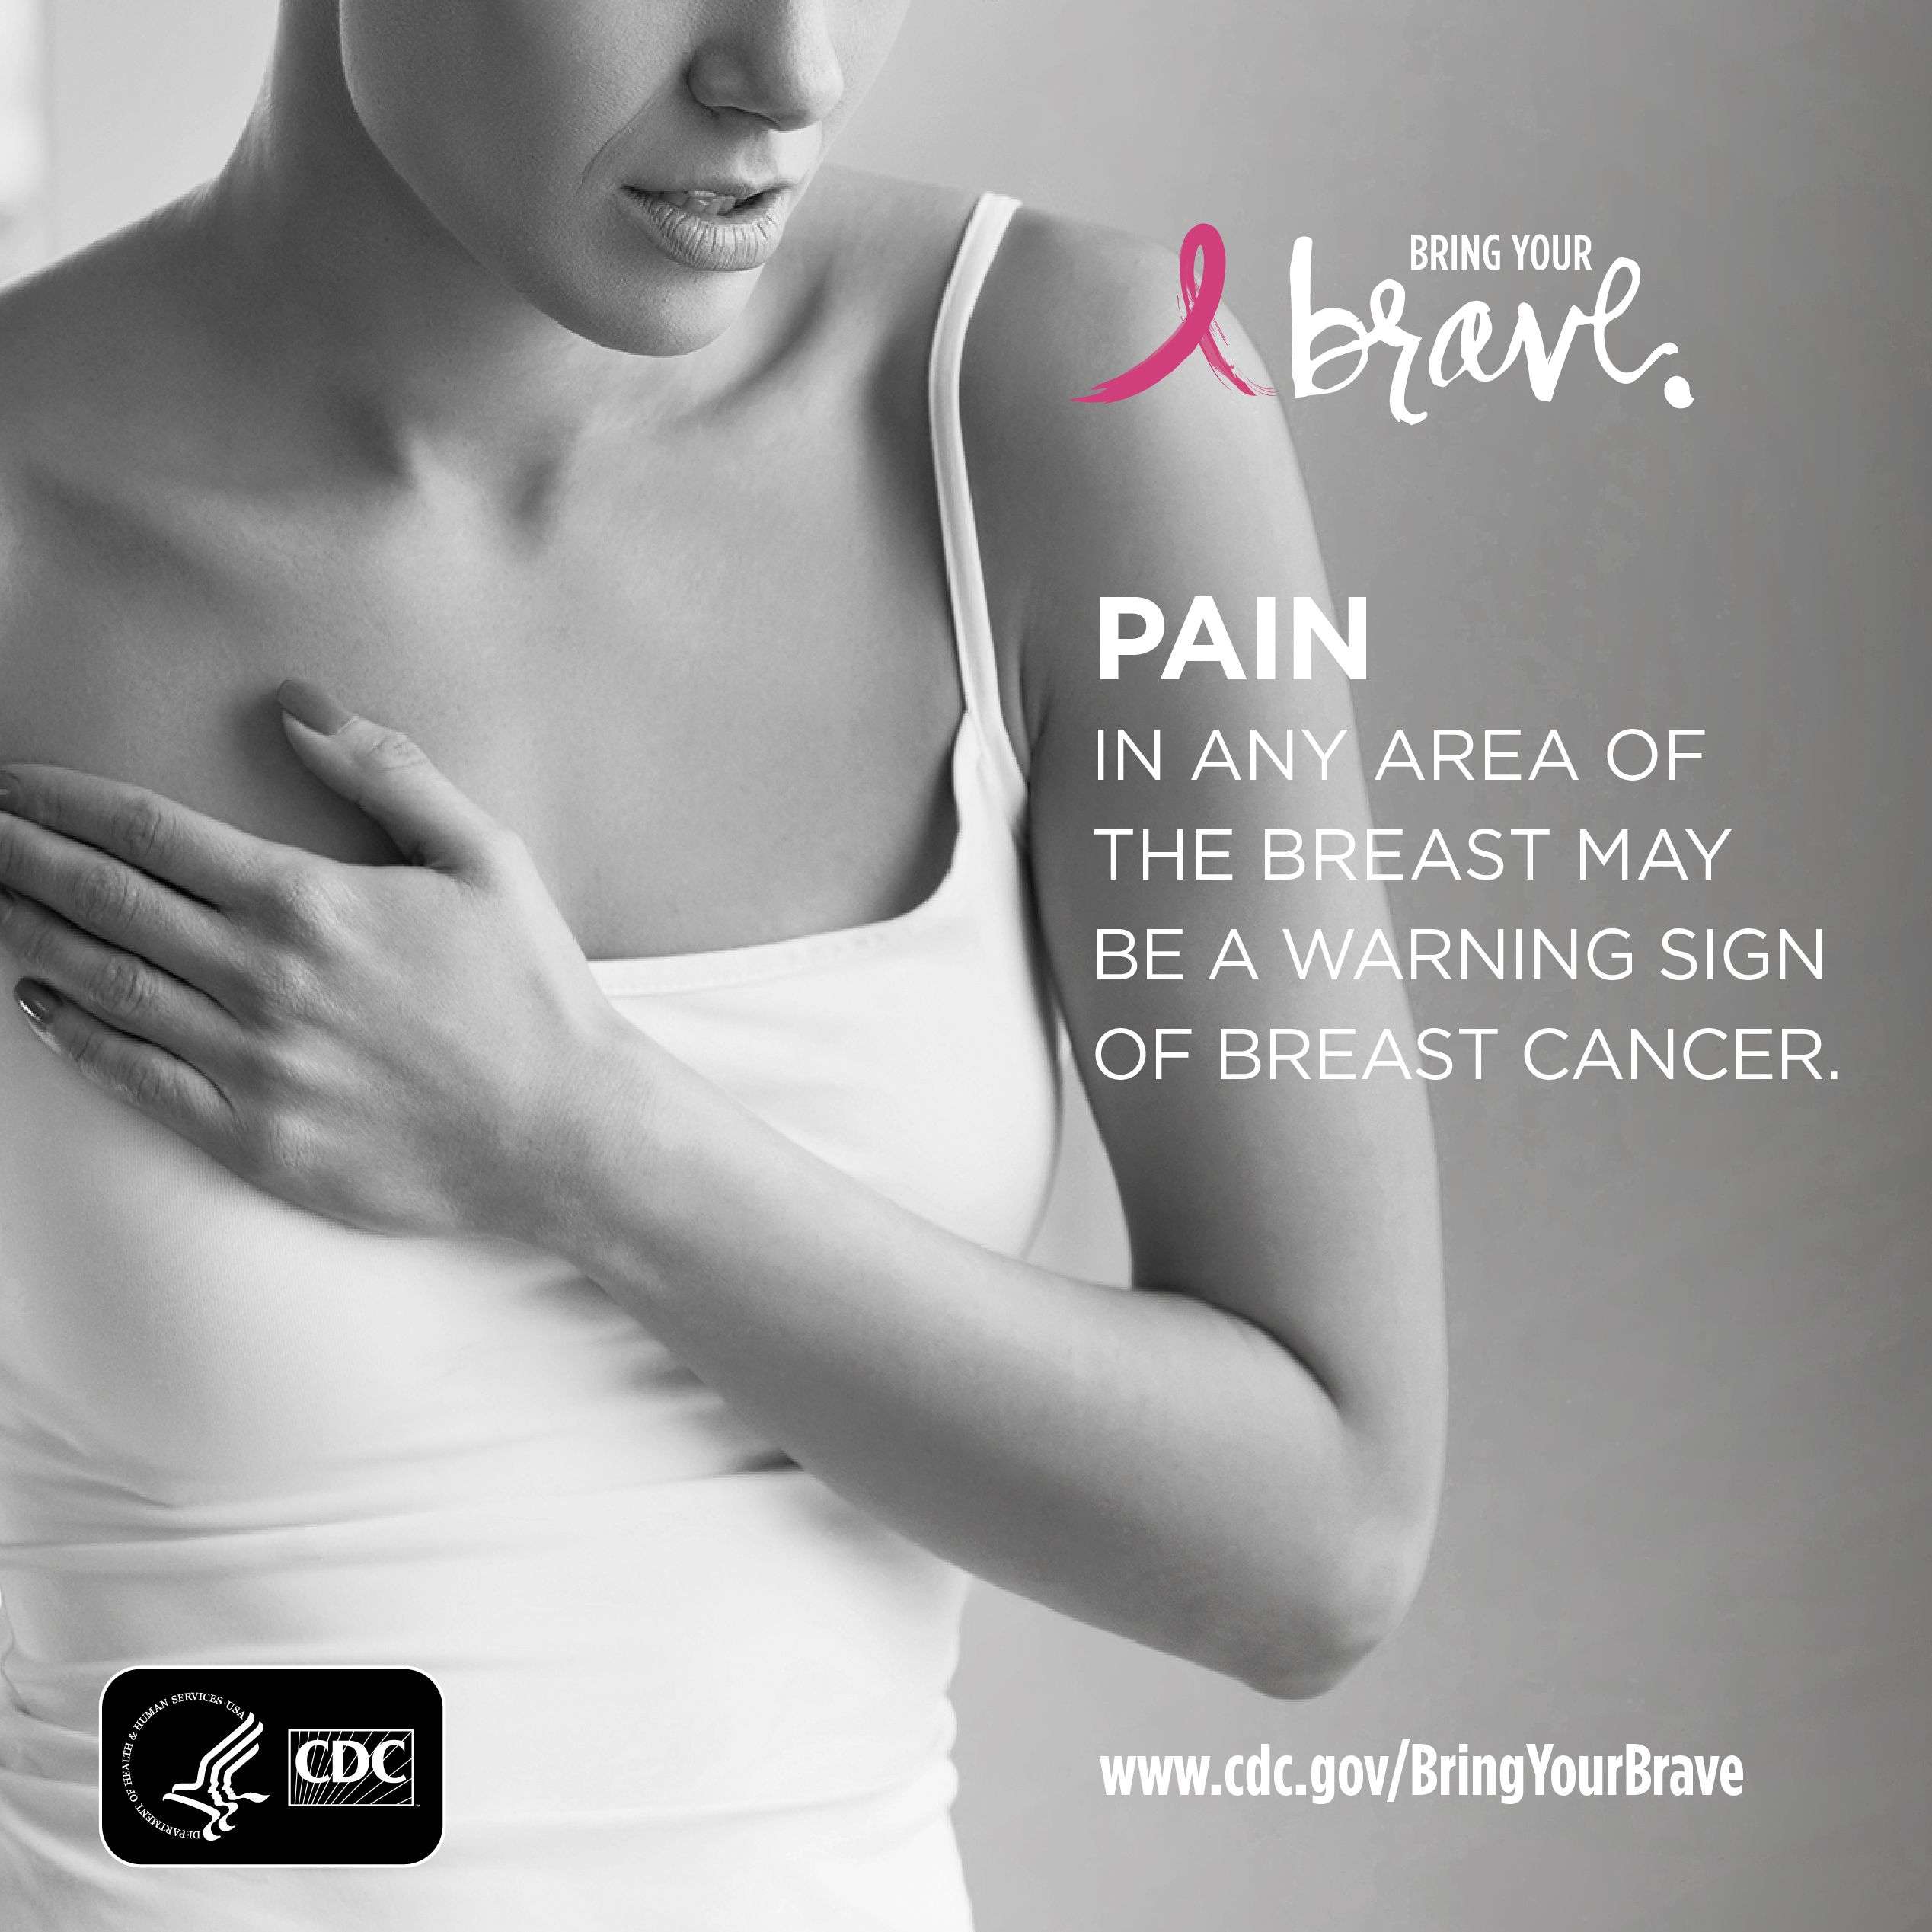 Pain in any area of the breast can be a warning sign for breast cancer ...